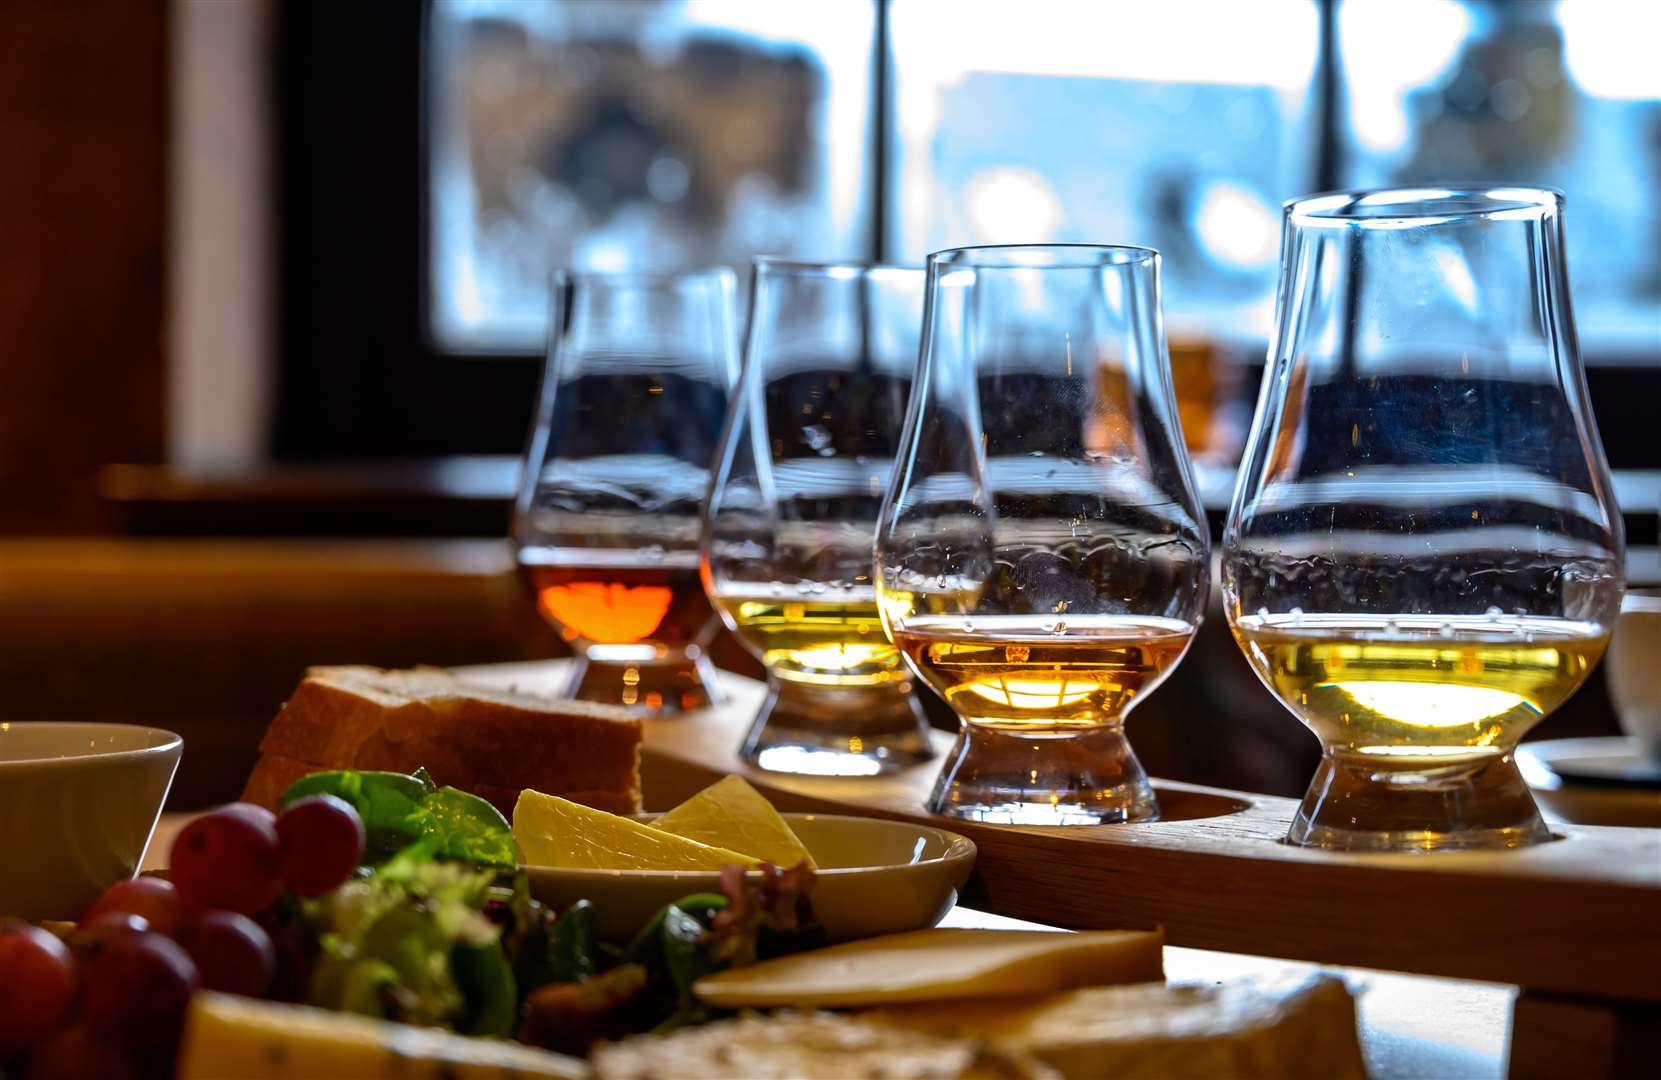 Whisky and cheese are among the top exports produced in the Highlands.